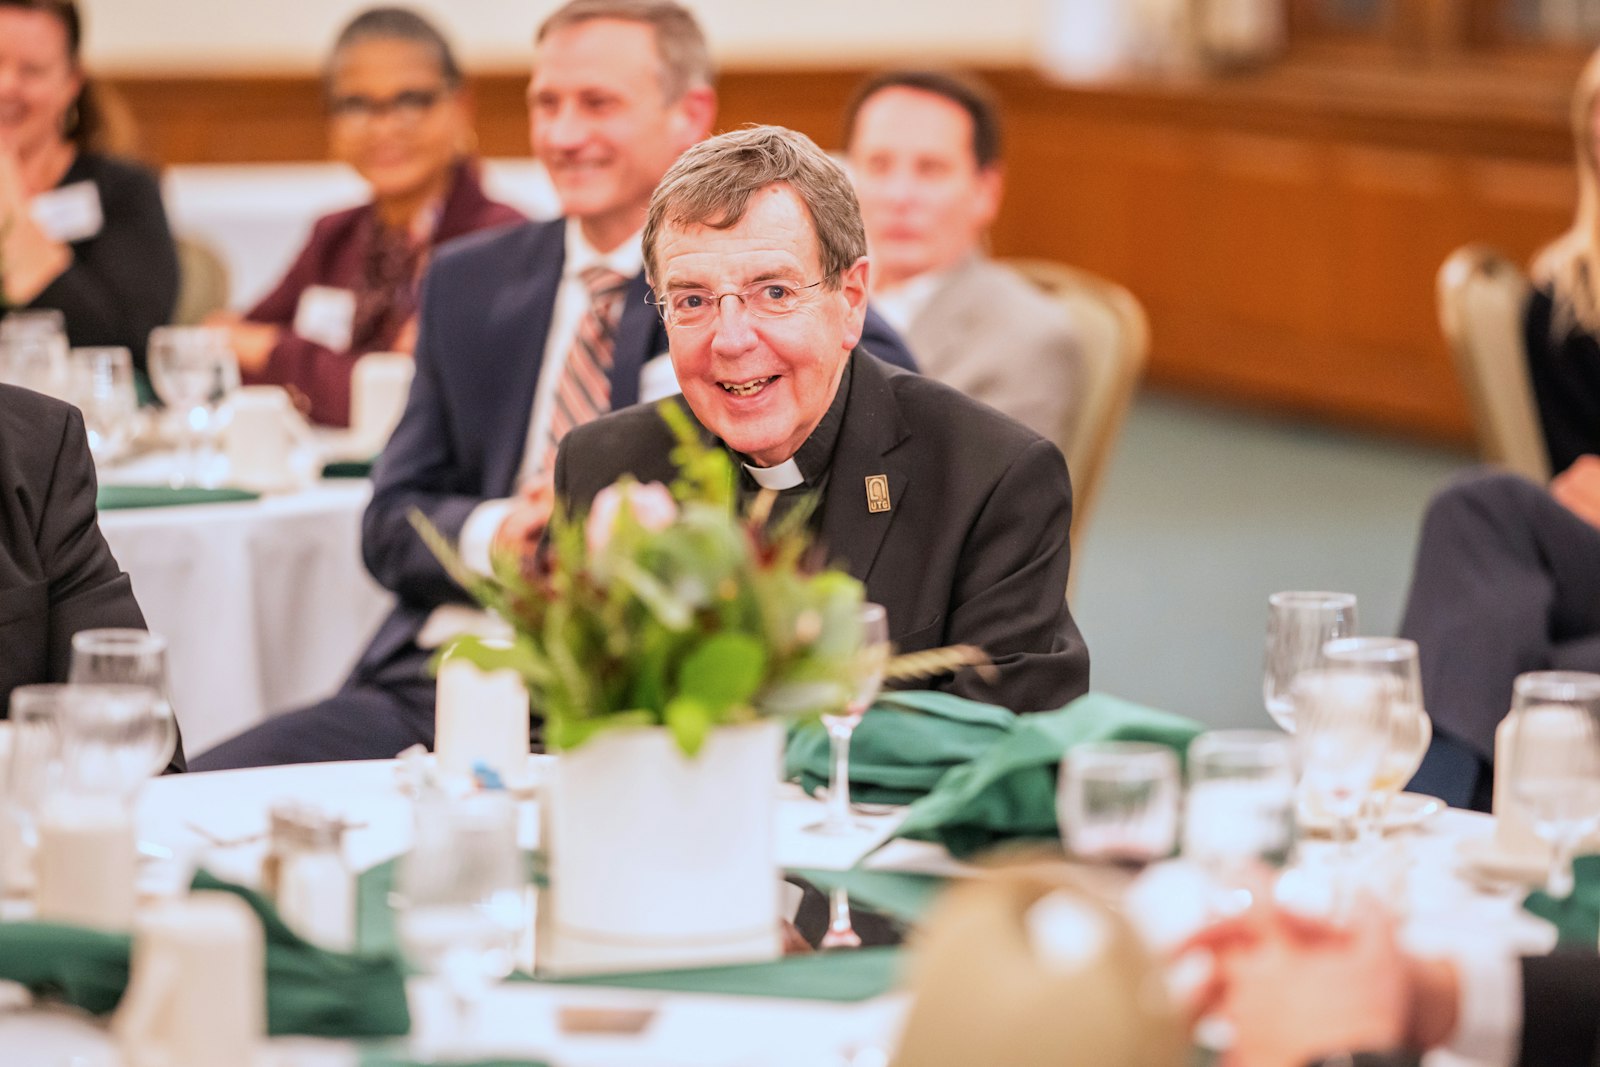 Archbishop Vigneron smiles Oct. 16 during a 75th birthday celebration in his honor with clergy, advisers and members of various consultative bodies at Sacred Heart Major Seminary. (Valaurian Waller | Detroit Catholic)